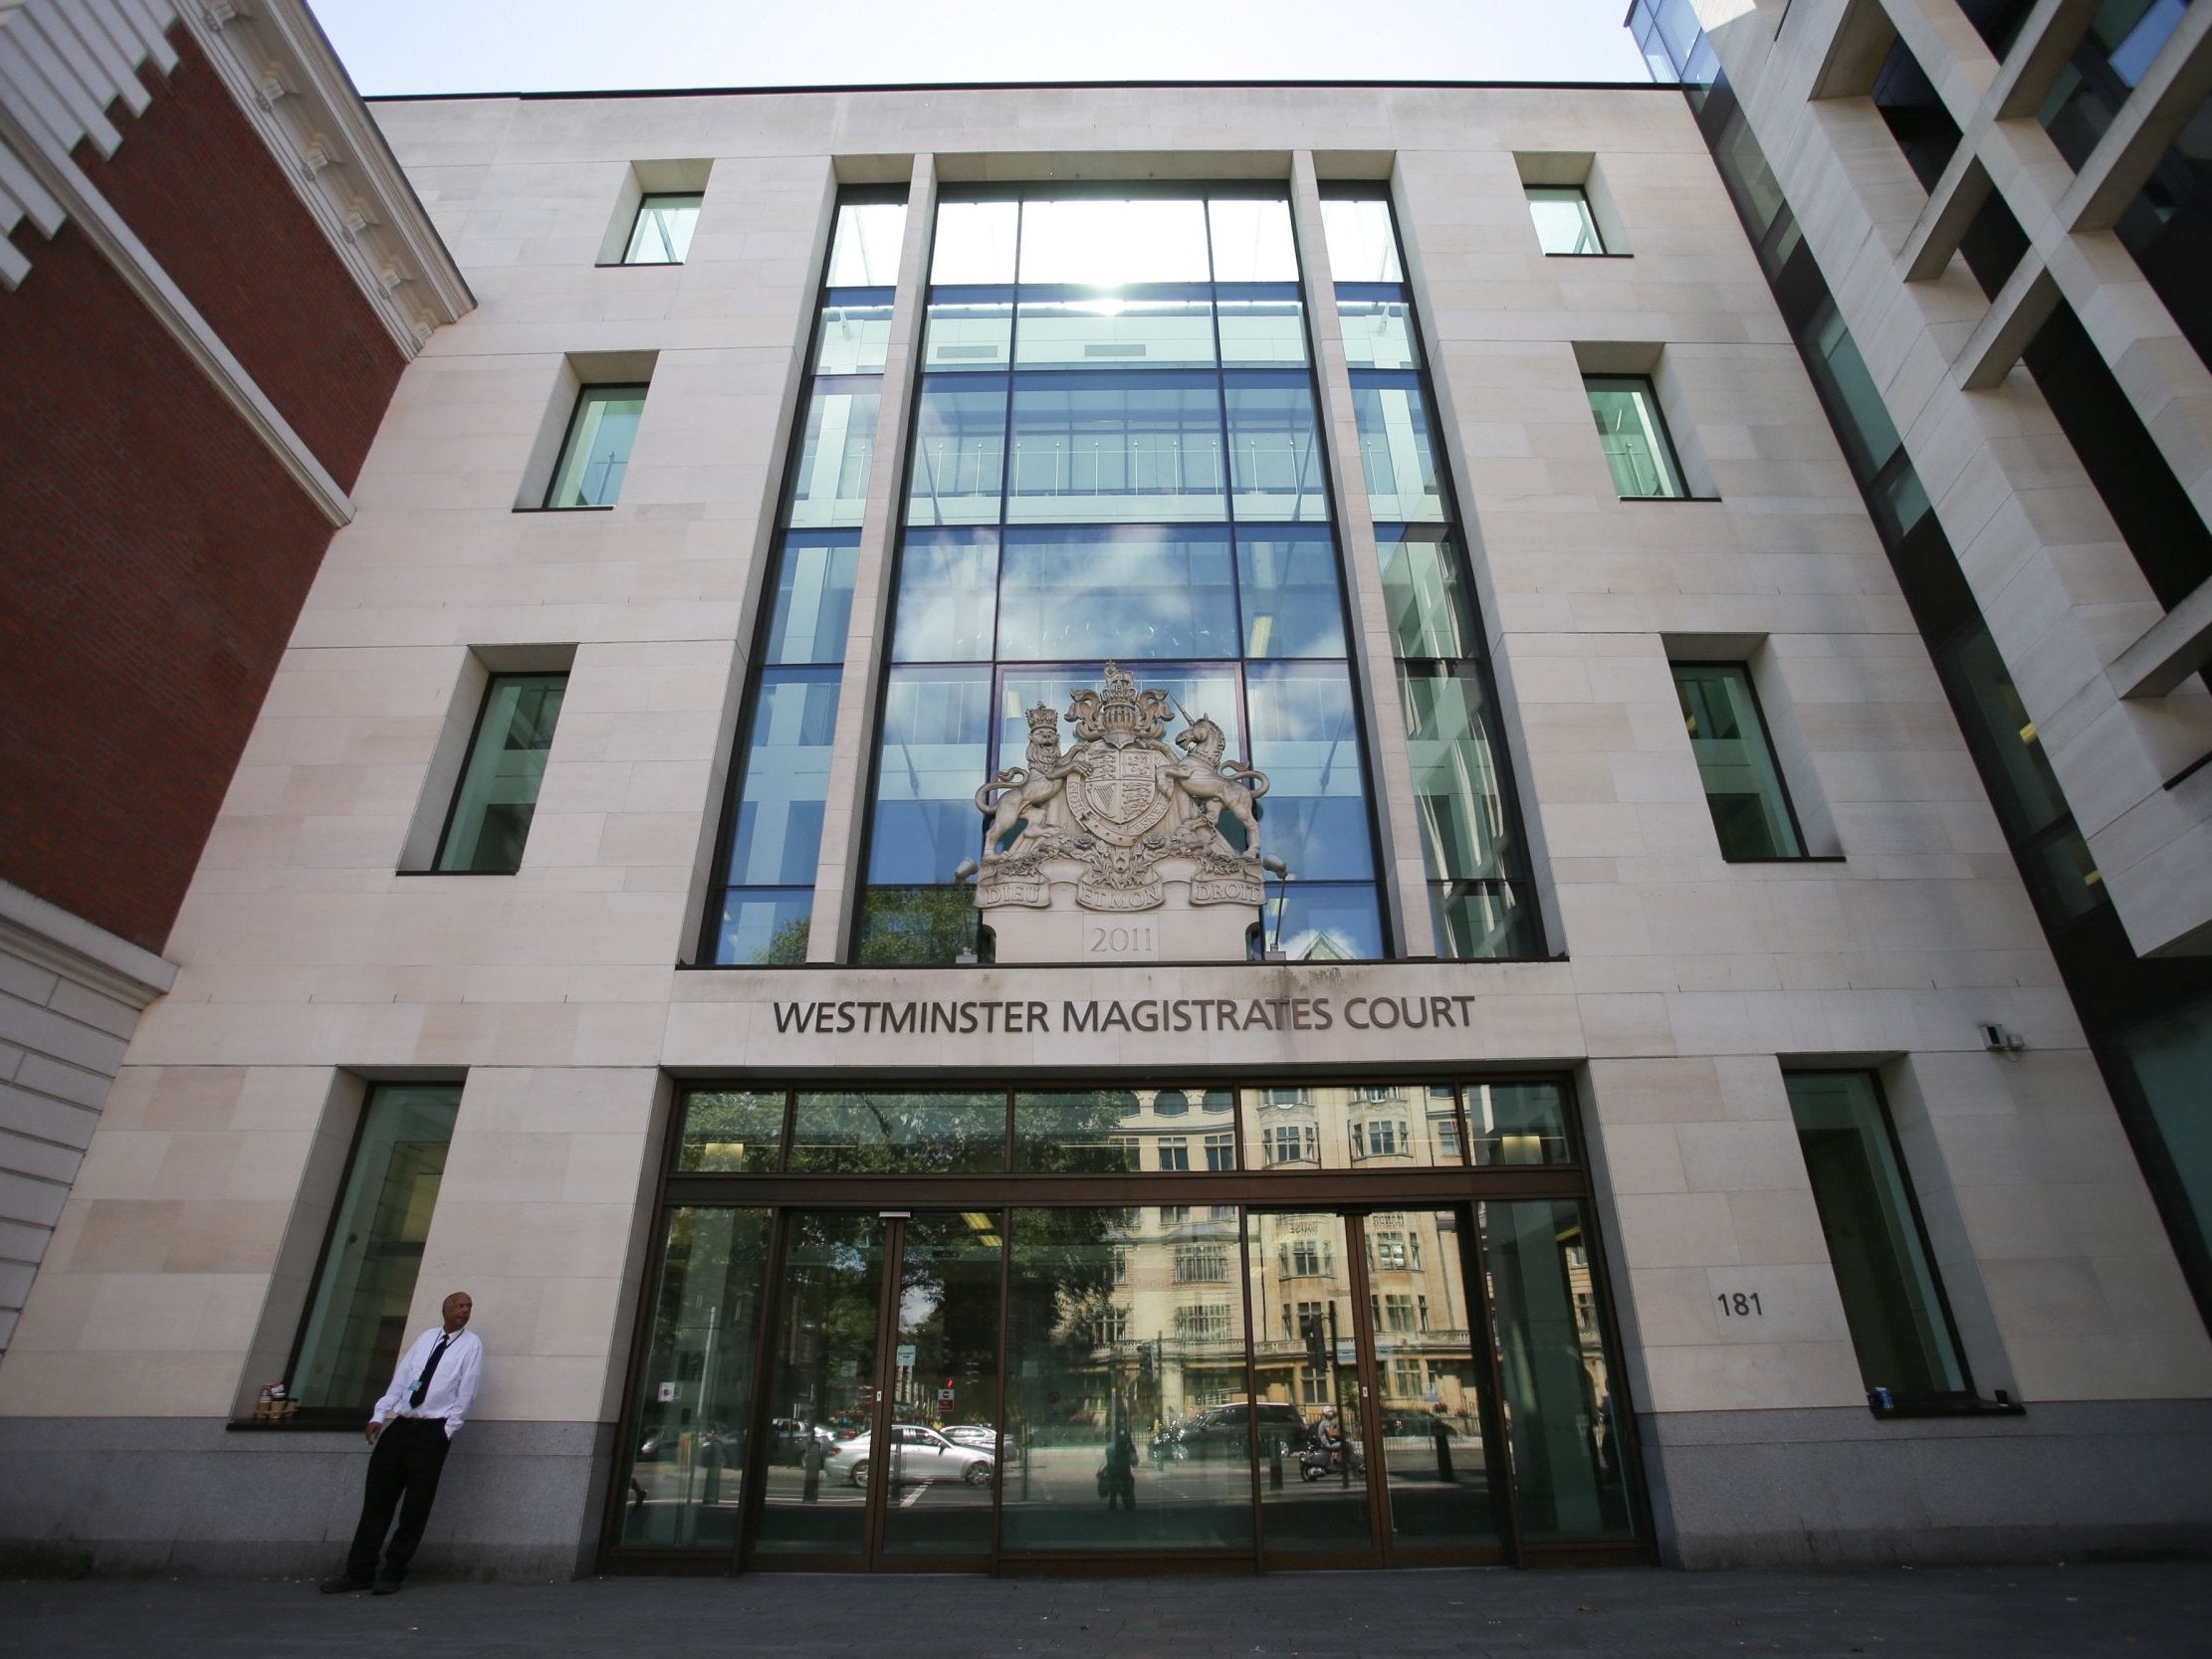 All criminal cases start in magistrates' courts